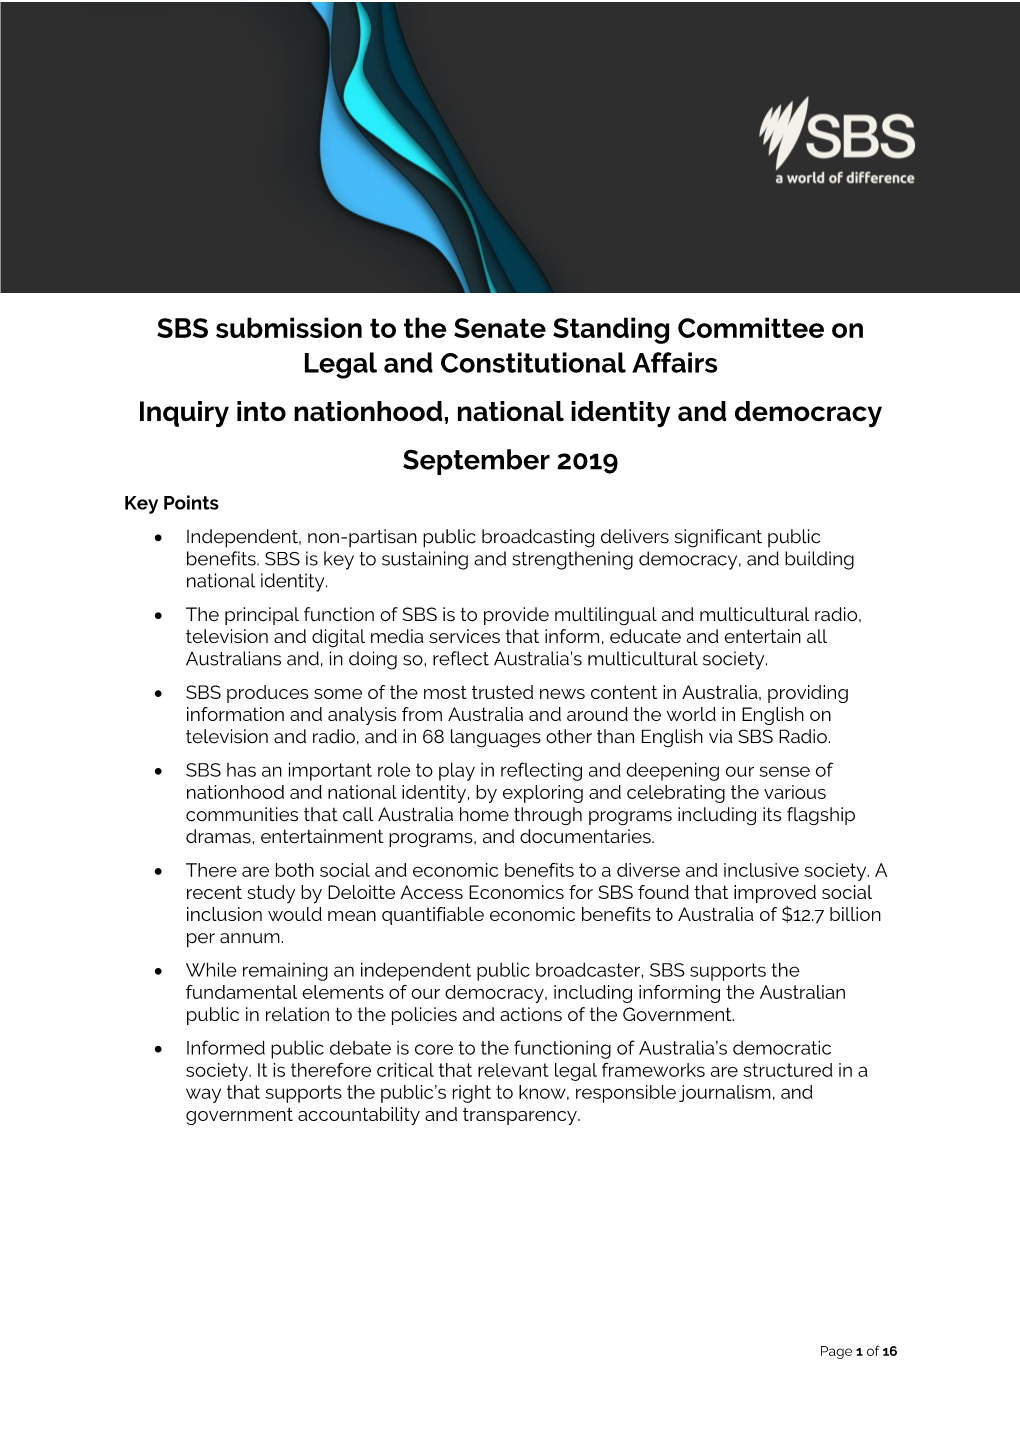 SBS Submission to the Senate Standing Committee on Legal and Constitutional Affairs Inquiry Into Nationhood, National Identity and Democracy September 2019